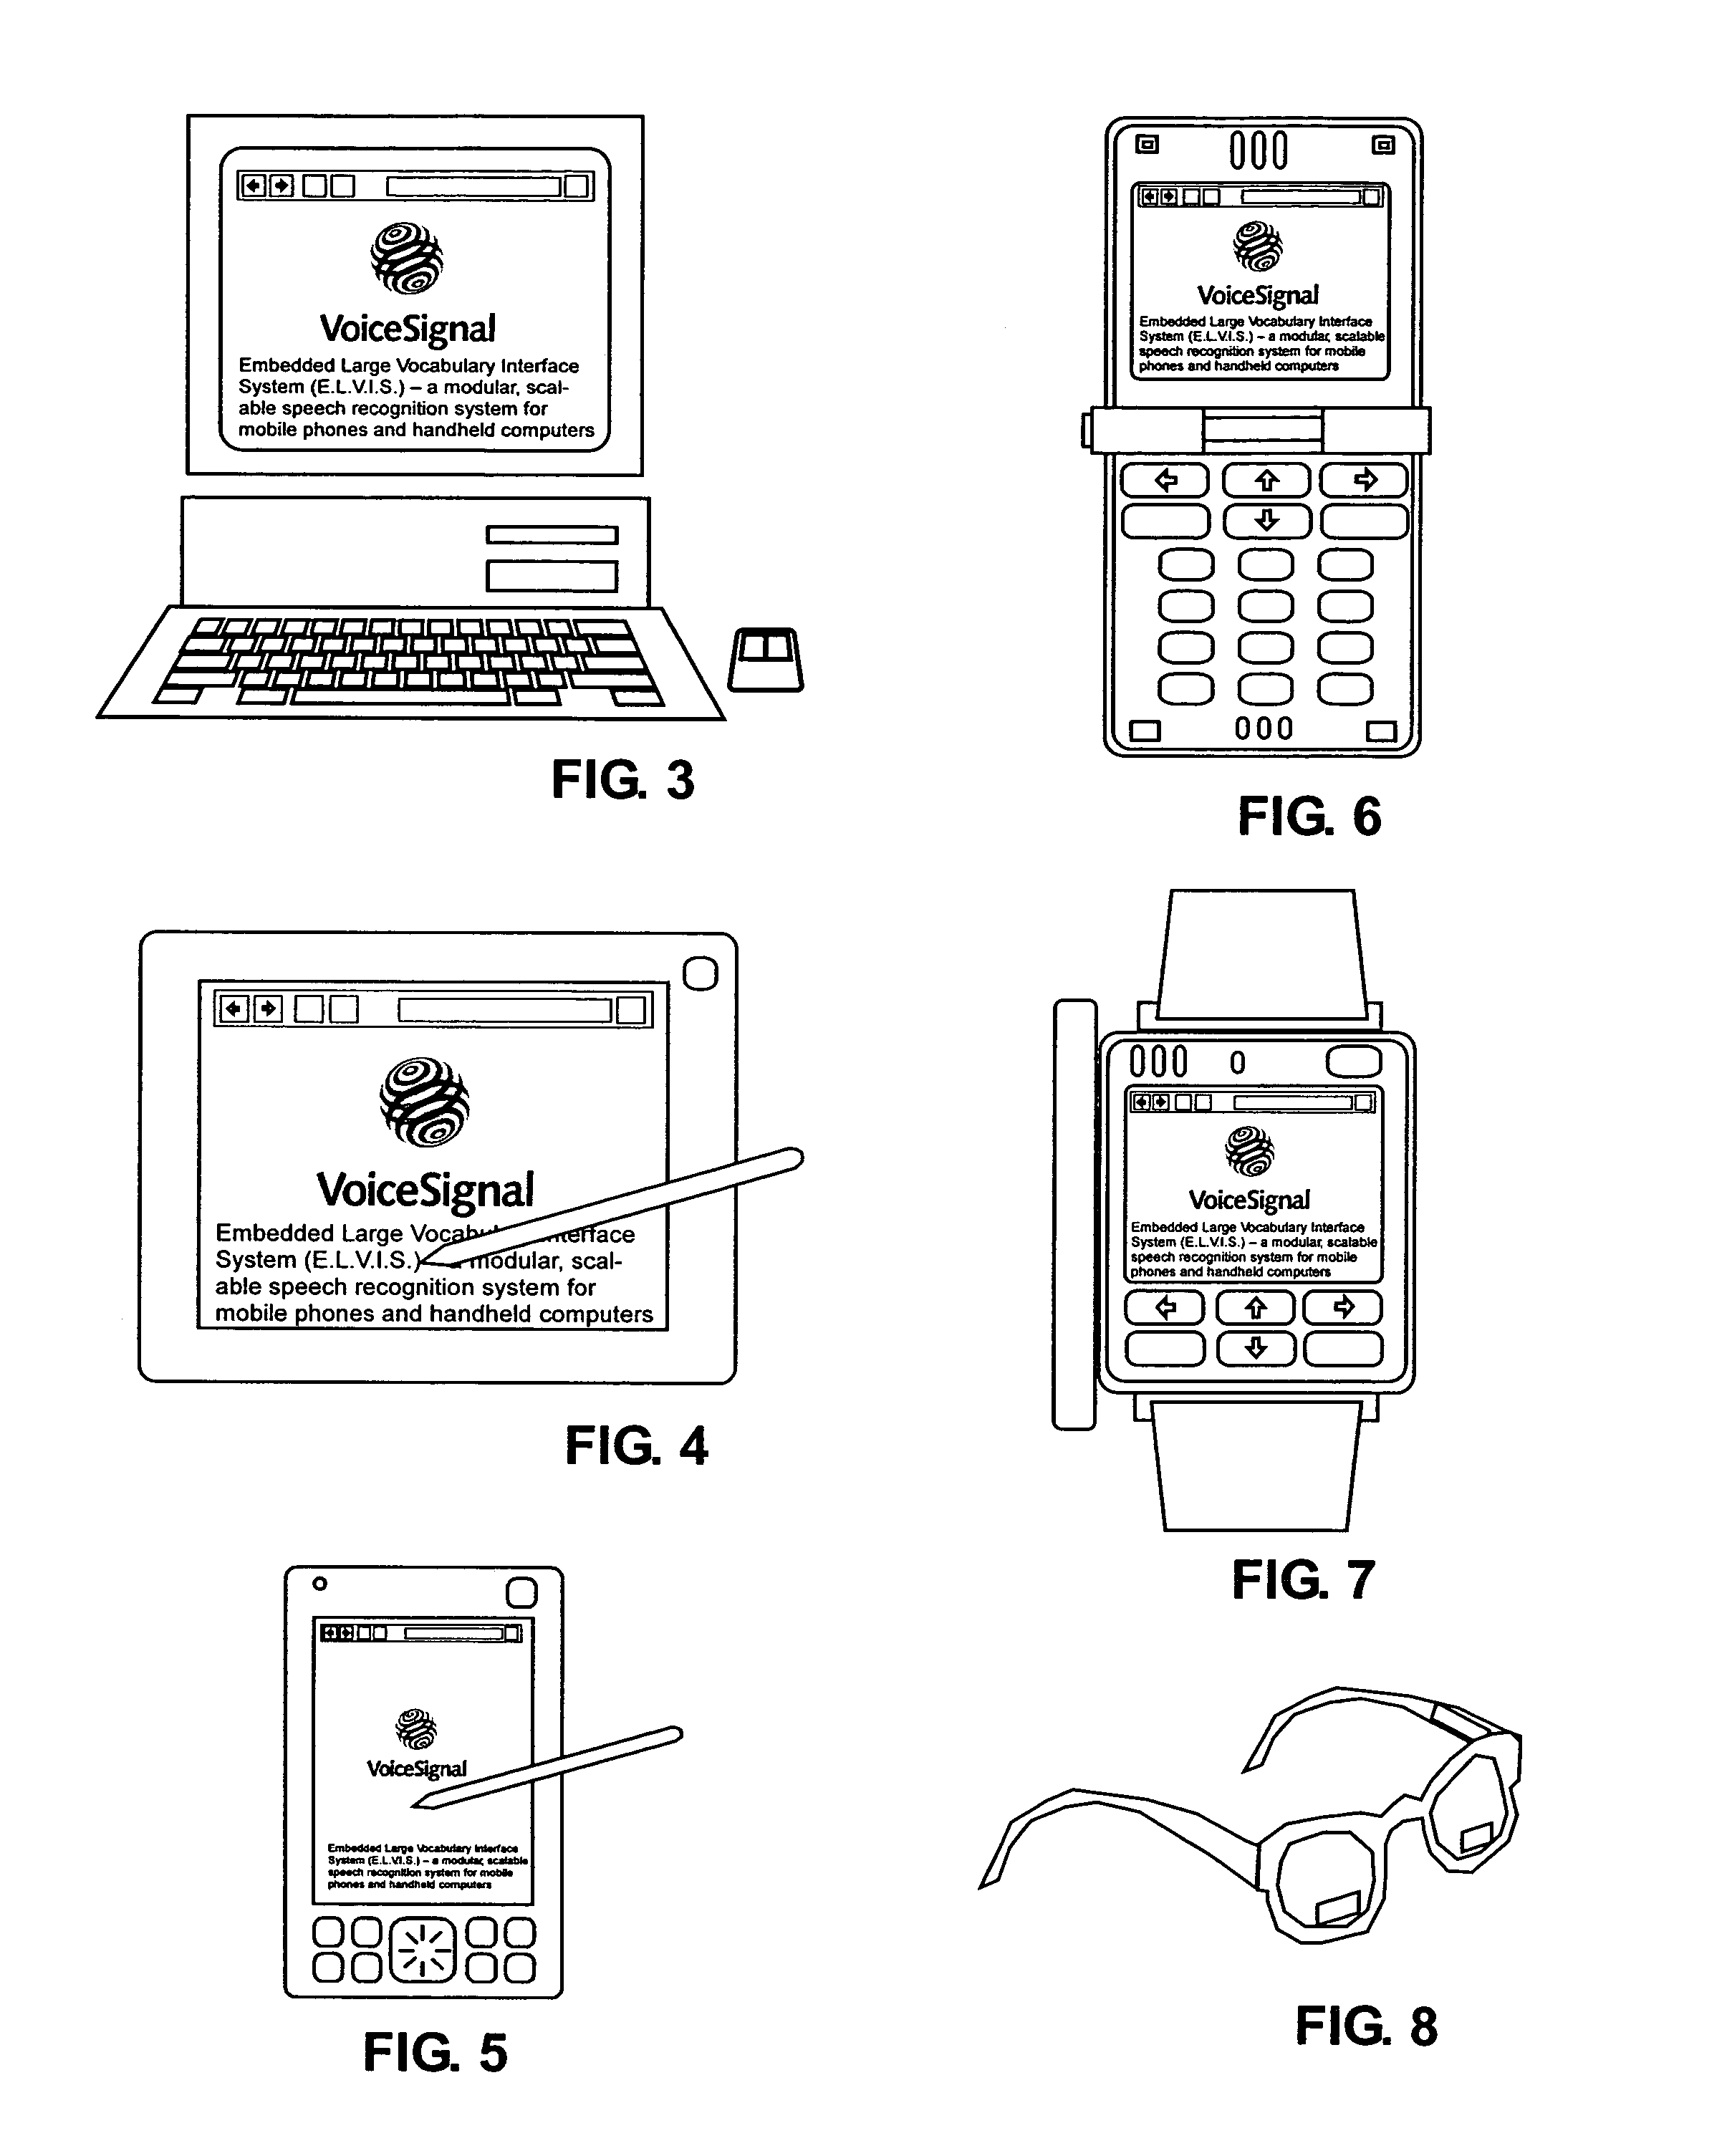 Combined speech recognition and text-to-speech generation